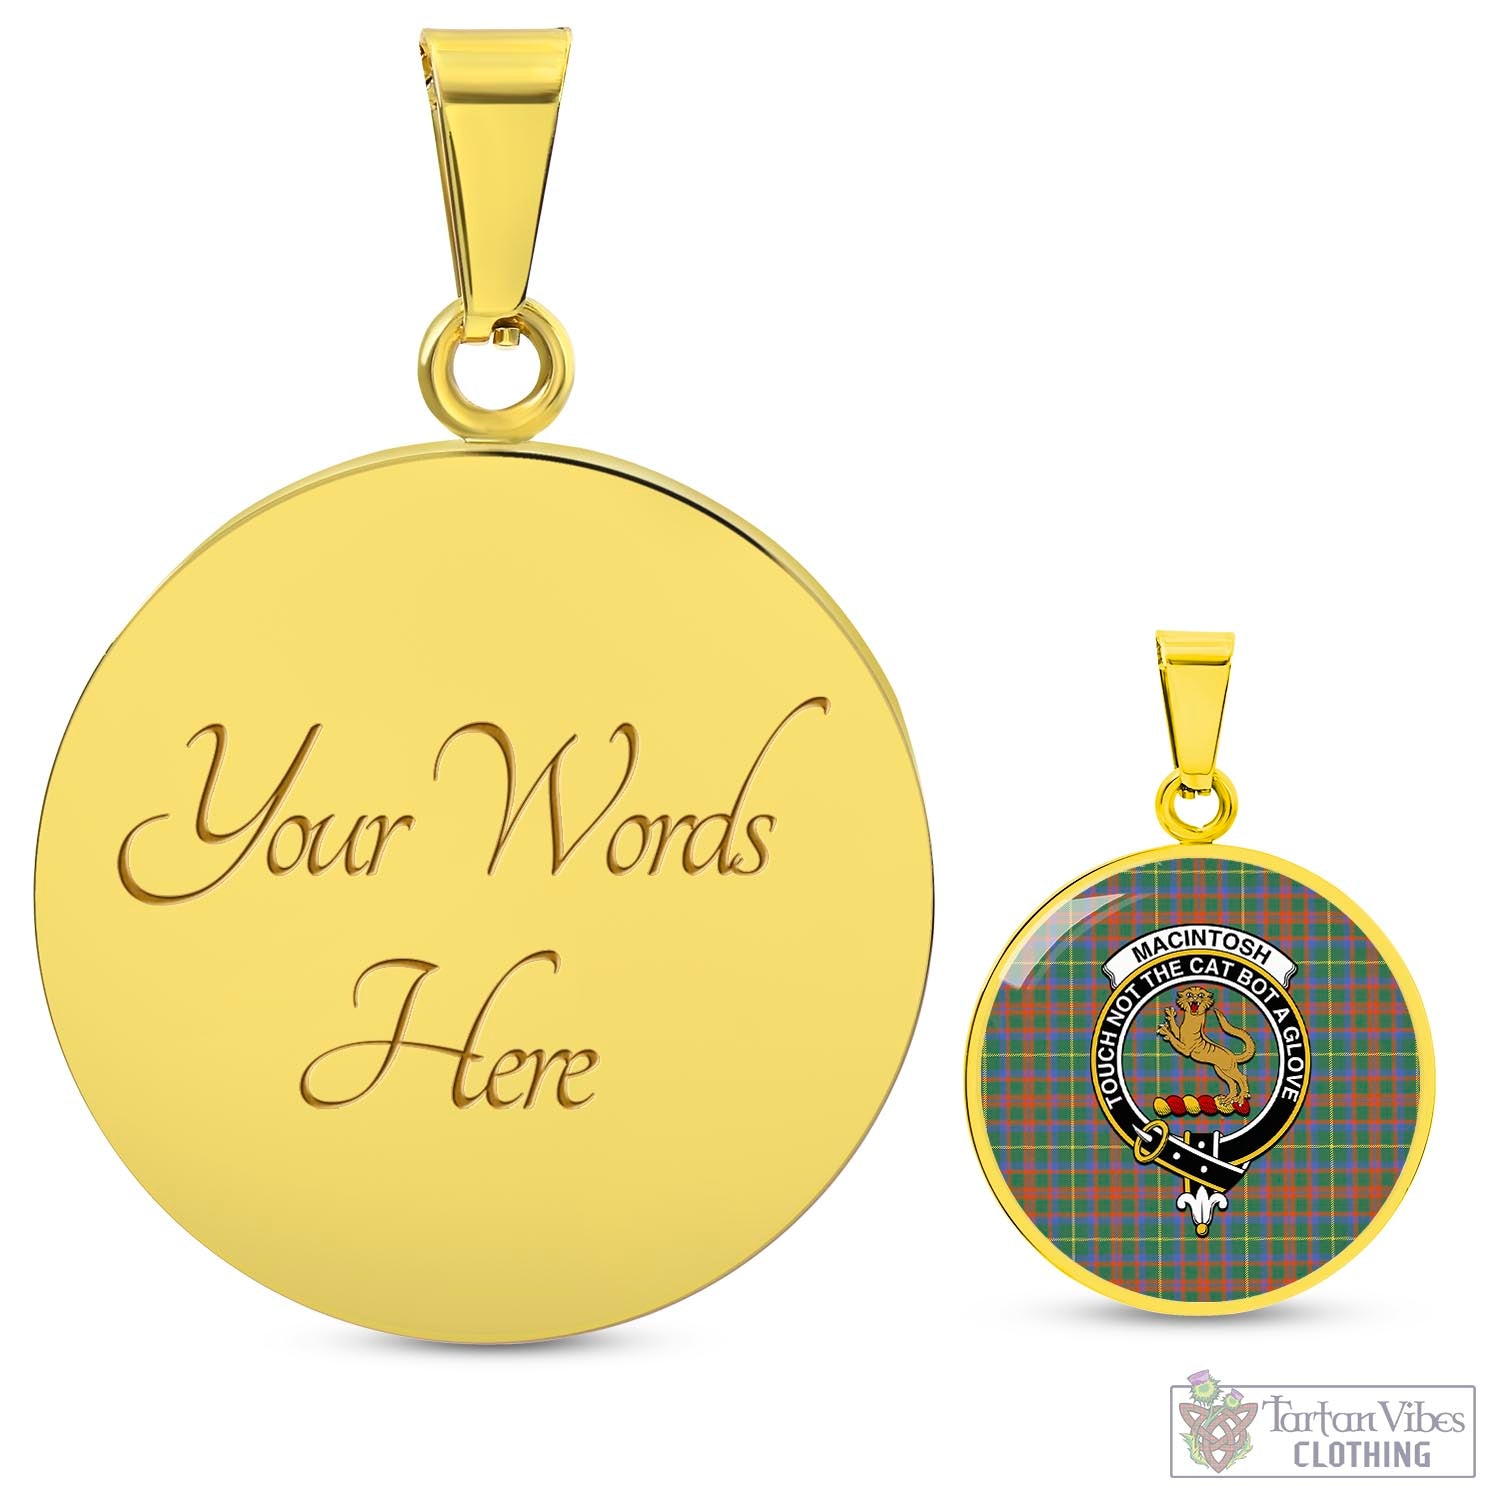 Tartan Vibes Clothing MacIntosh Hunting Ancient Tartan Circle Necklace with Family Crest